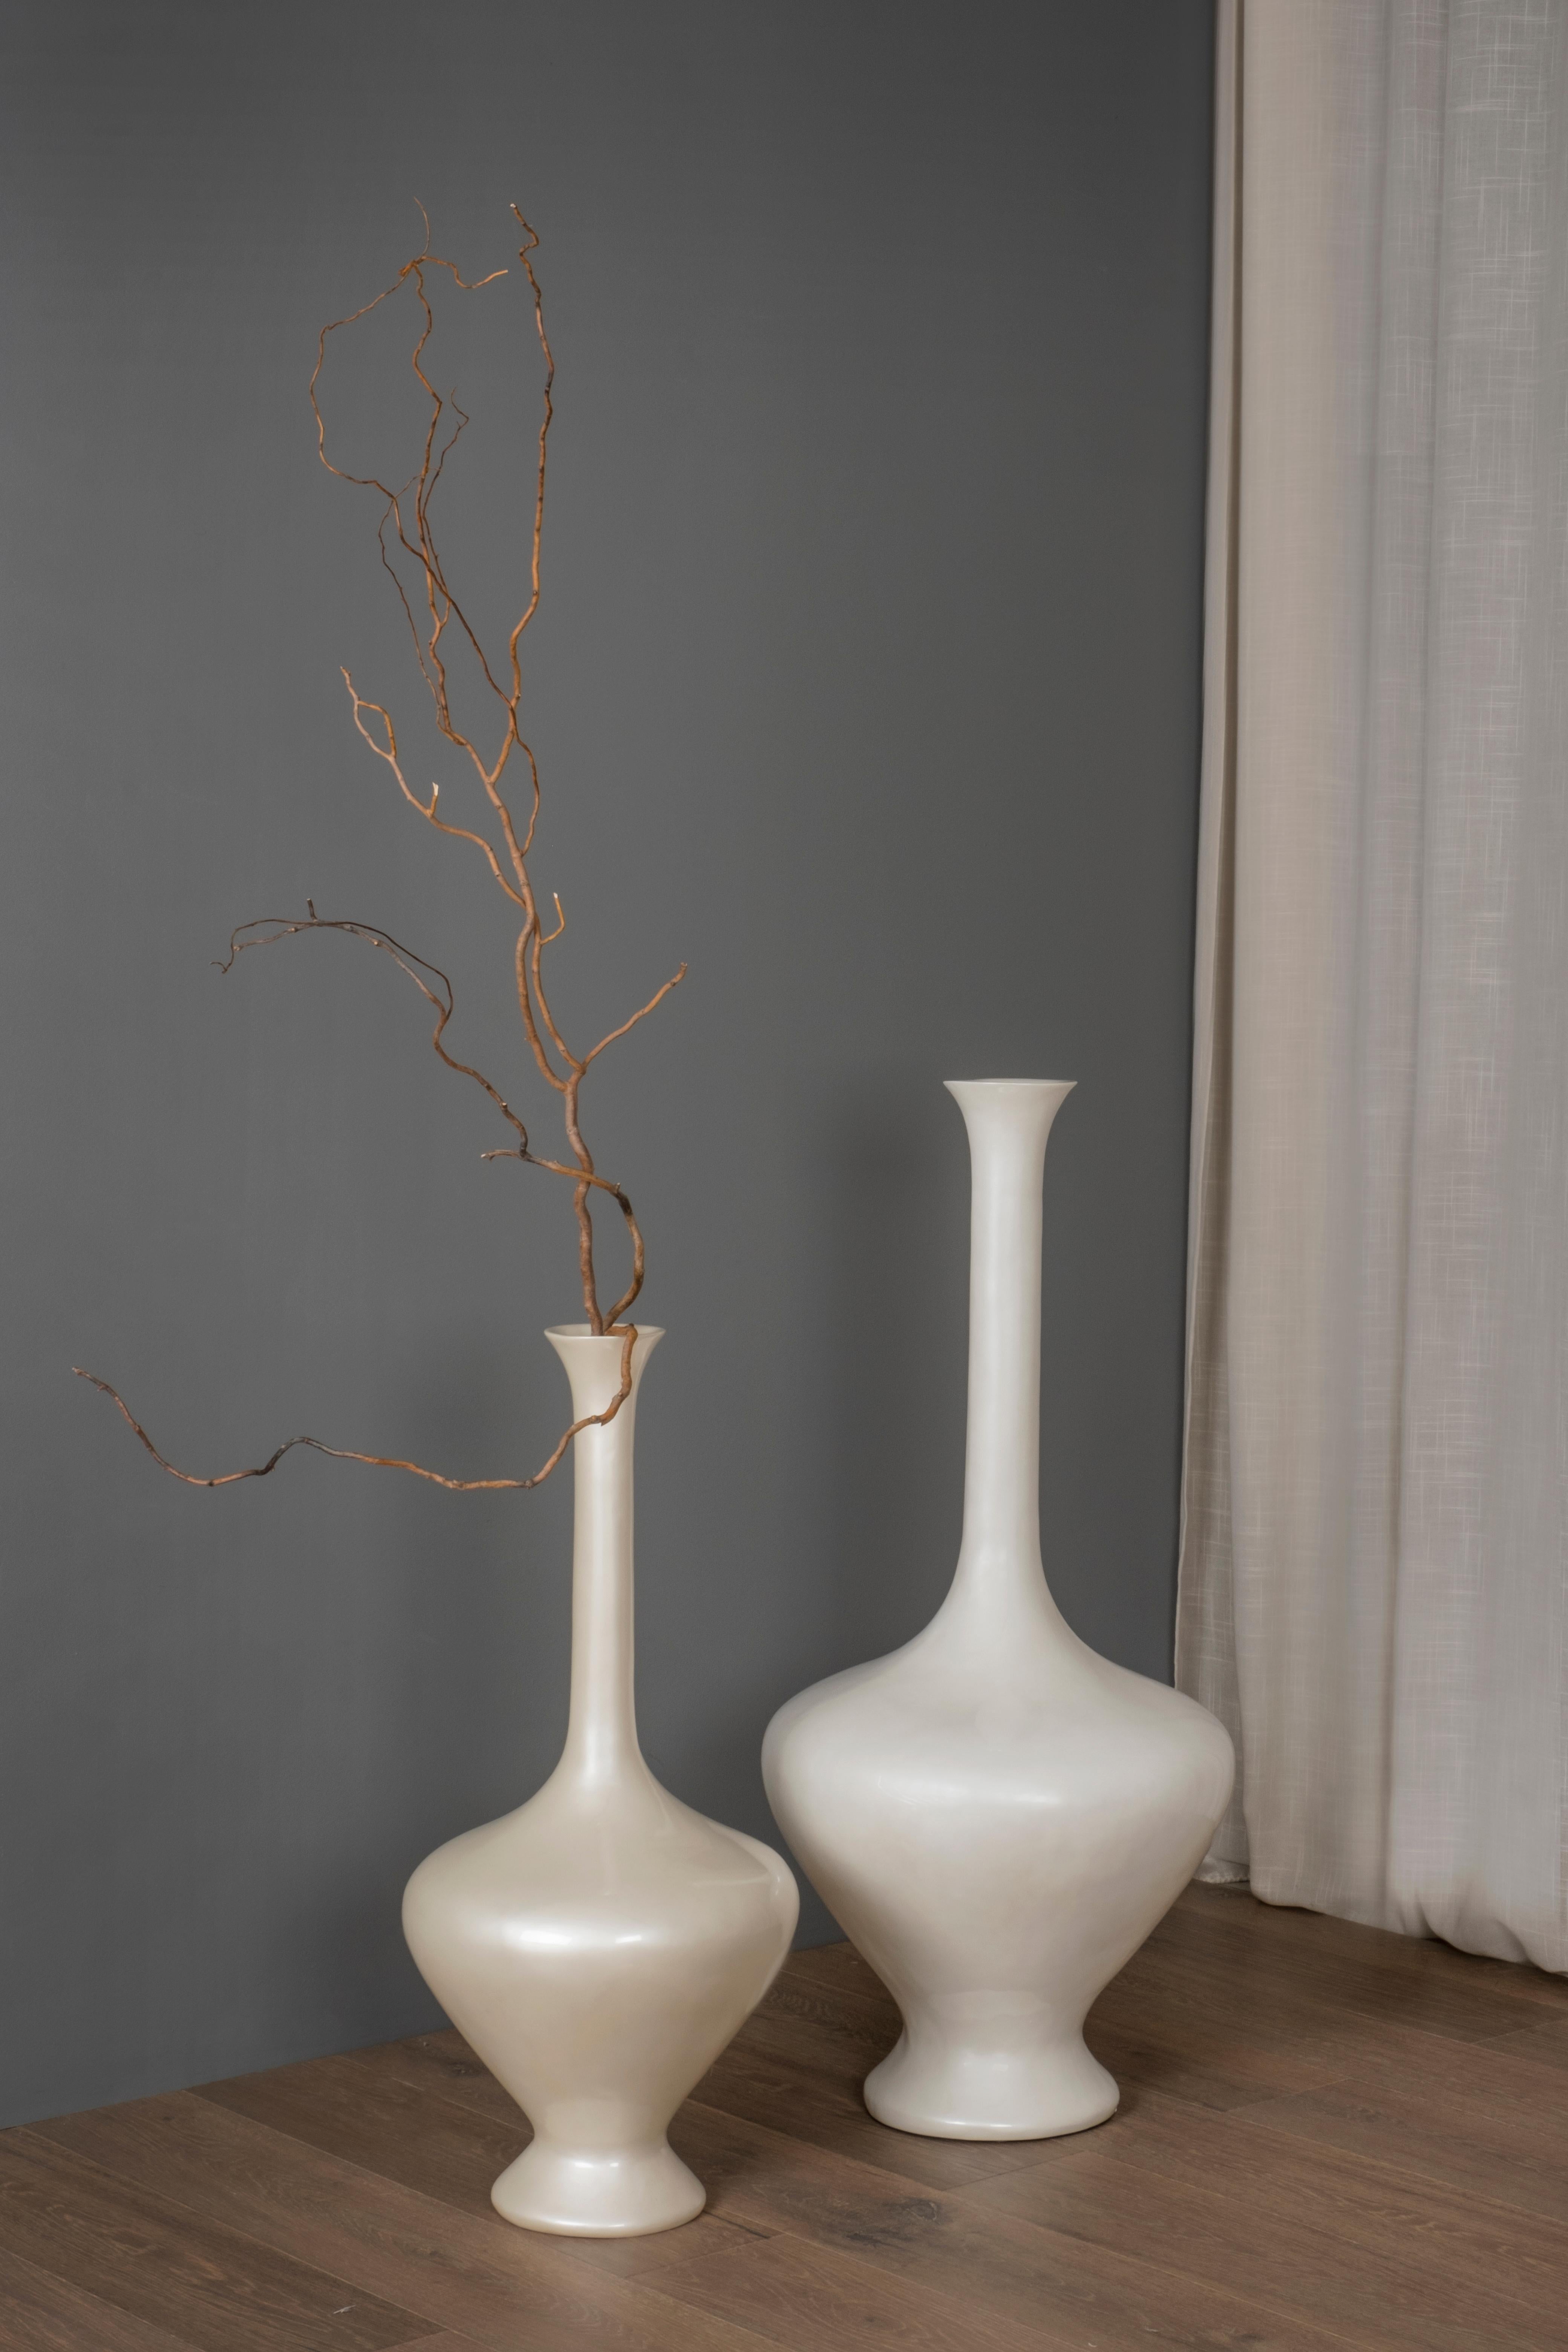 Set/2 Decorative Floor Vases, Lusitanus Home Collection, by Lusitanus Home.

This beautiful set of two resin floor vases that catches the eye with its pearl white elegant silhouette. These floor vases are the perfect decorative choice to enrich any